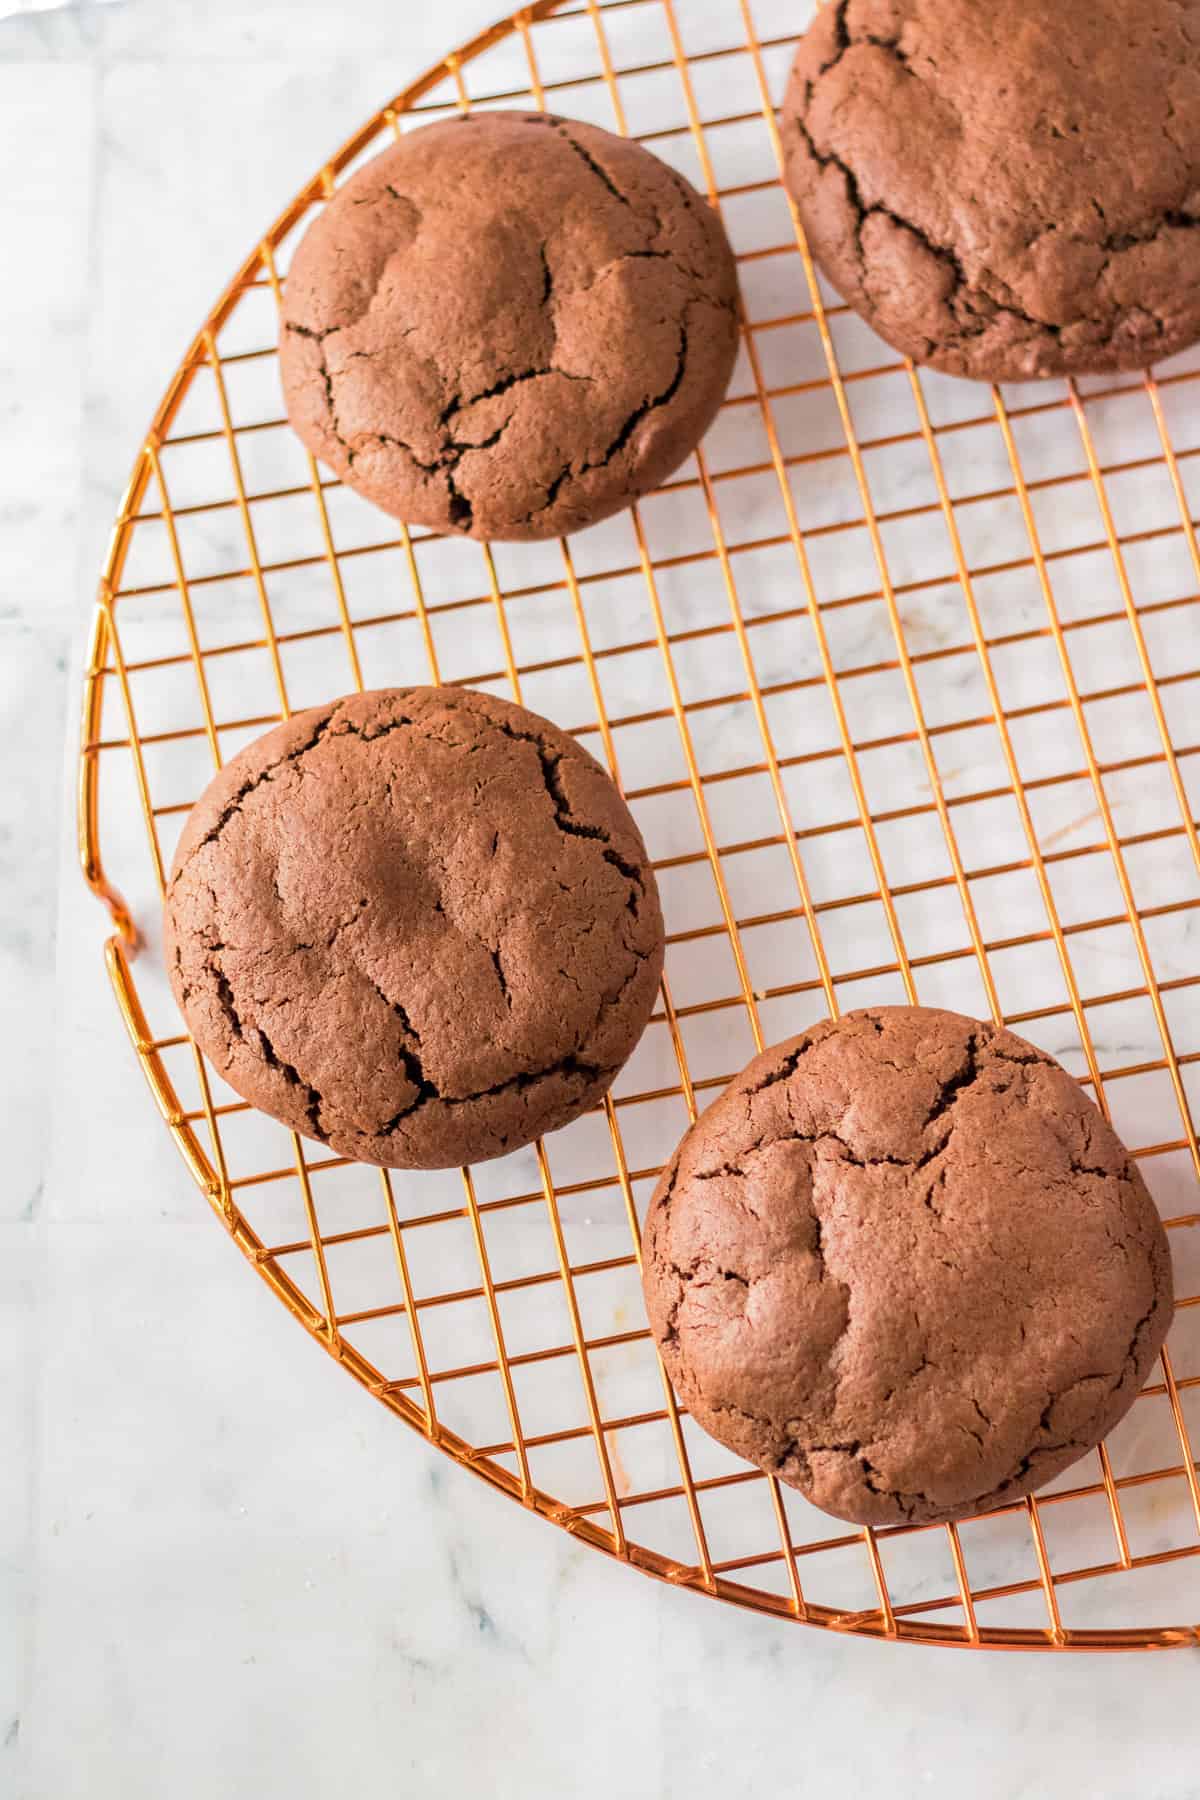 Large, thick chocolate cookies on brass cooling rack.